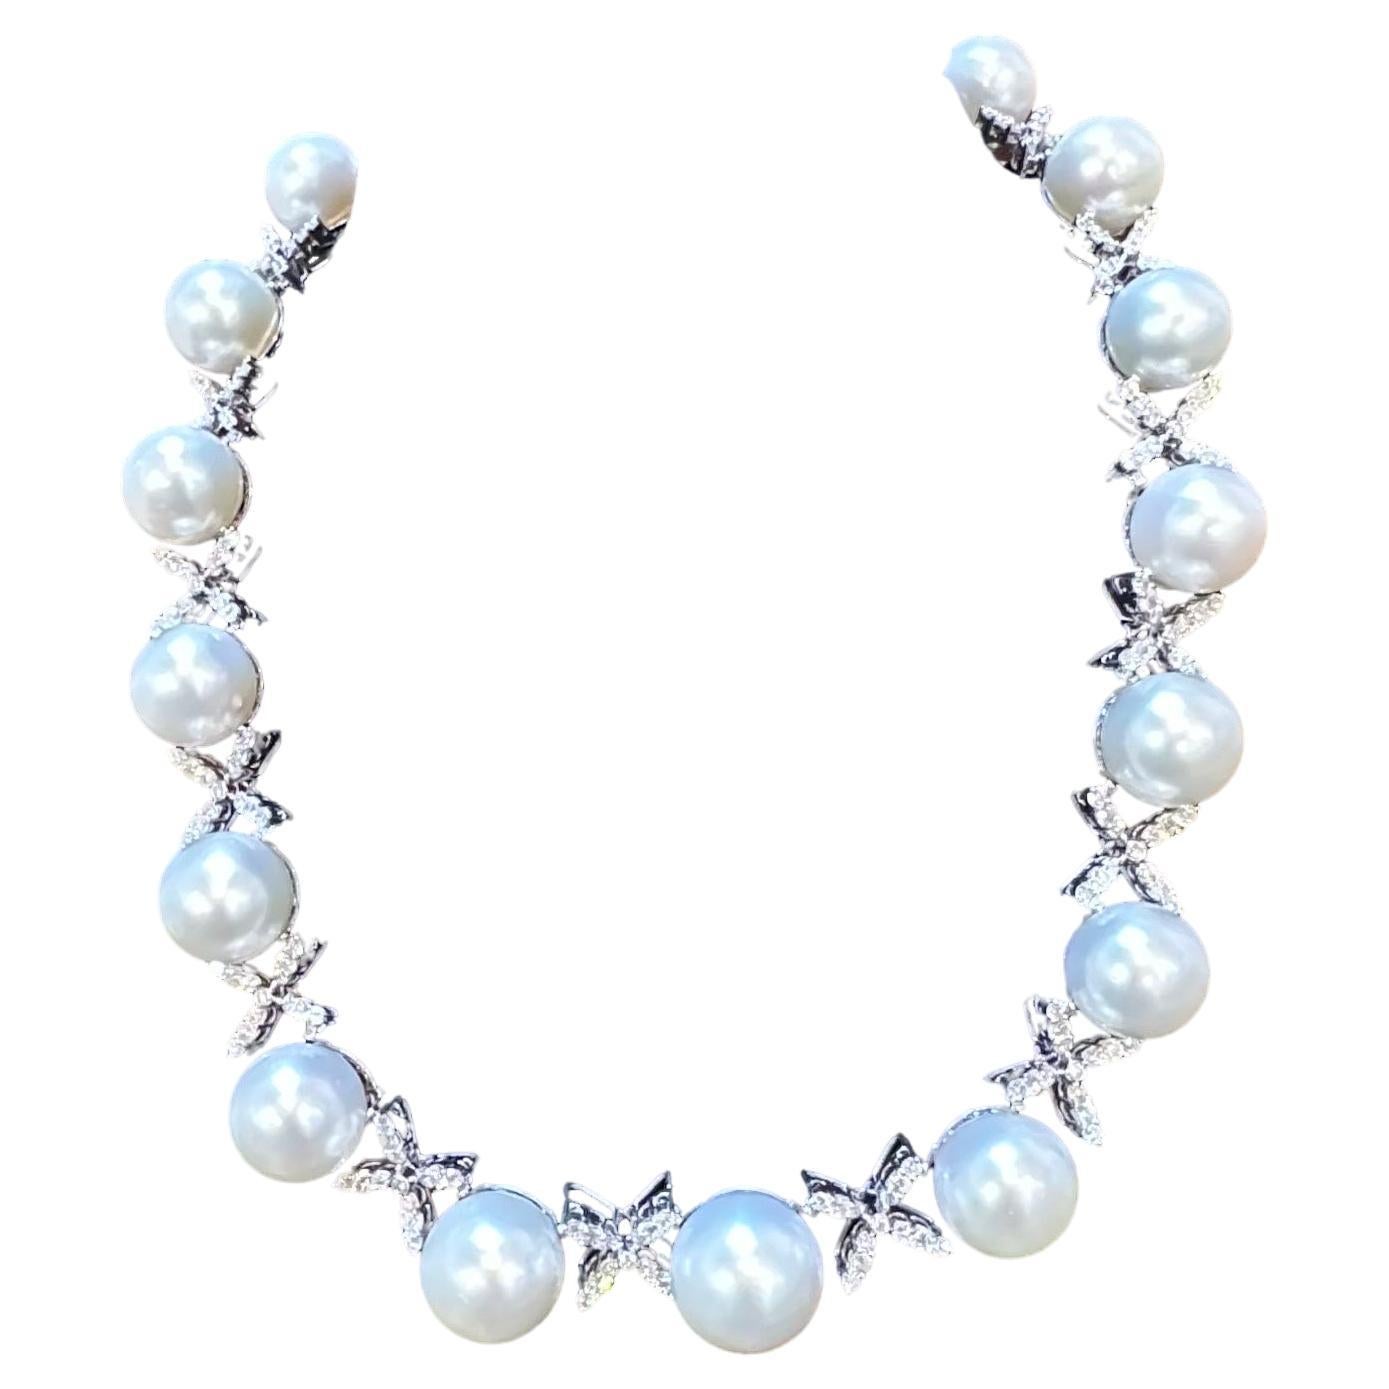 Round Cut Classic White 12-17 MM  South Sea Cultured Pearl & 20 Ct Diamond Necklace, 17